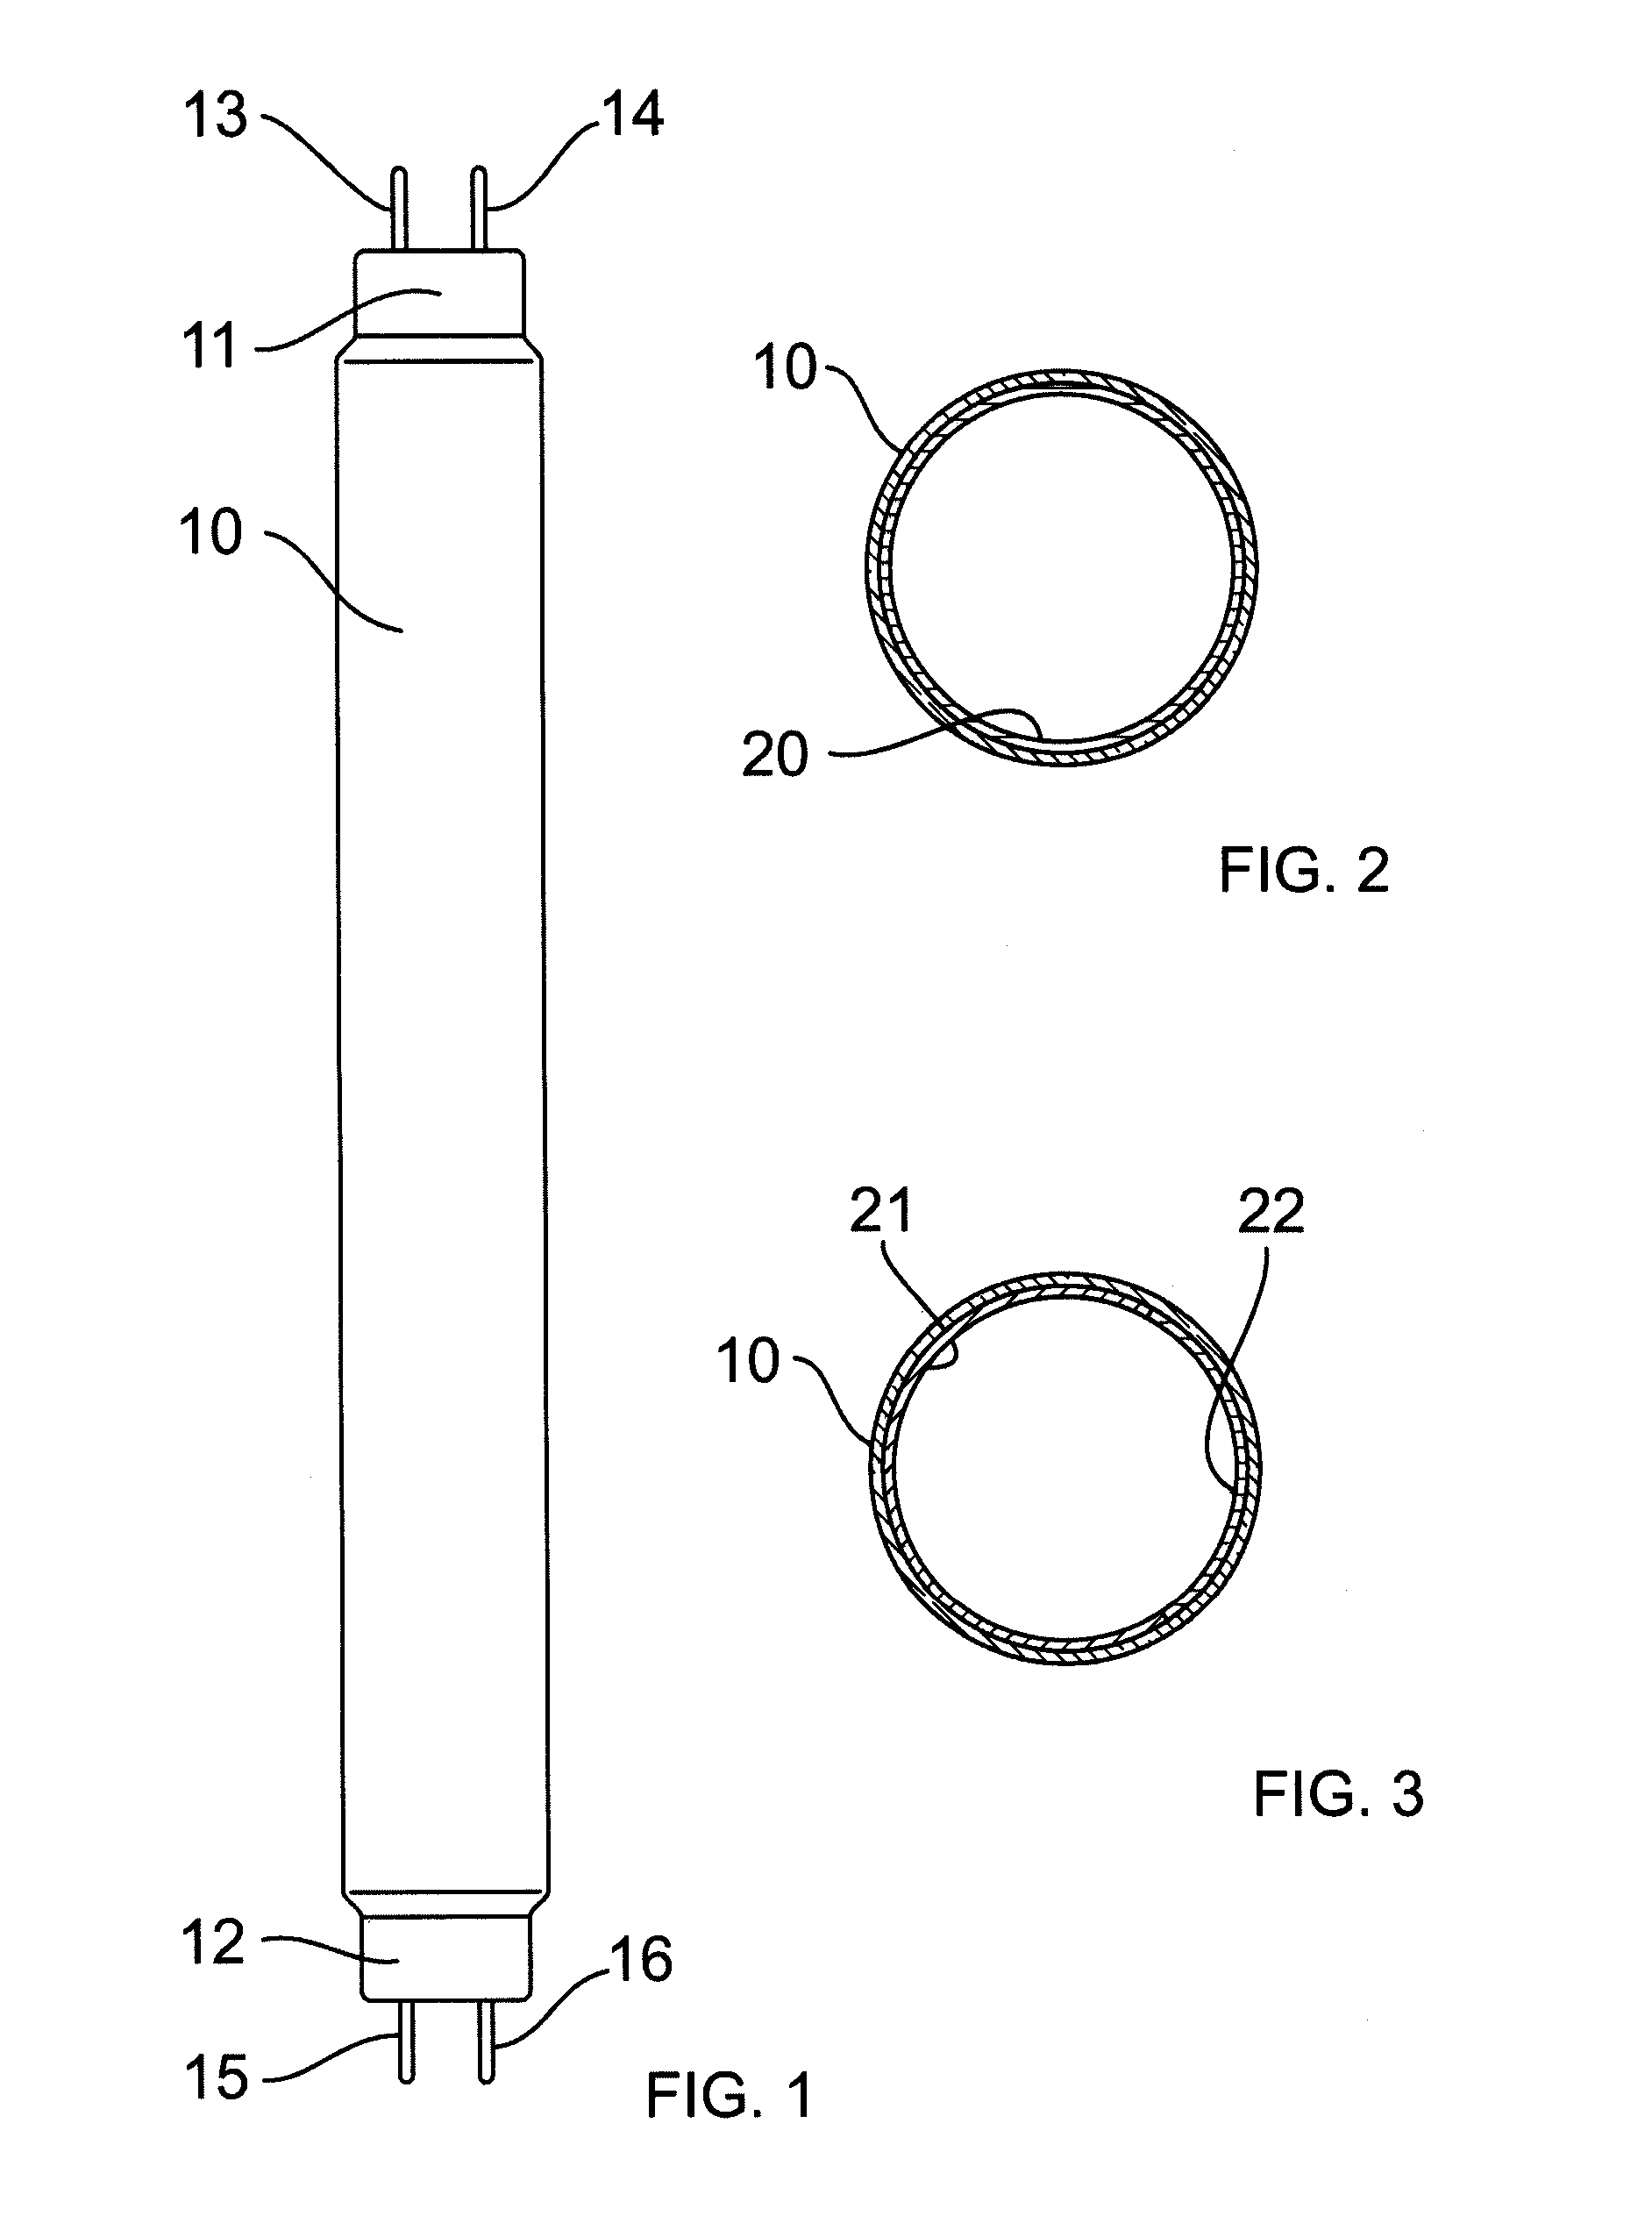 Fluorescent lamp for stimulating previtamin d3 production